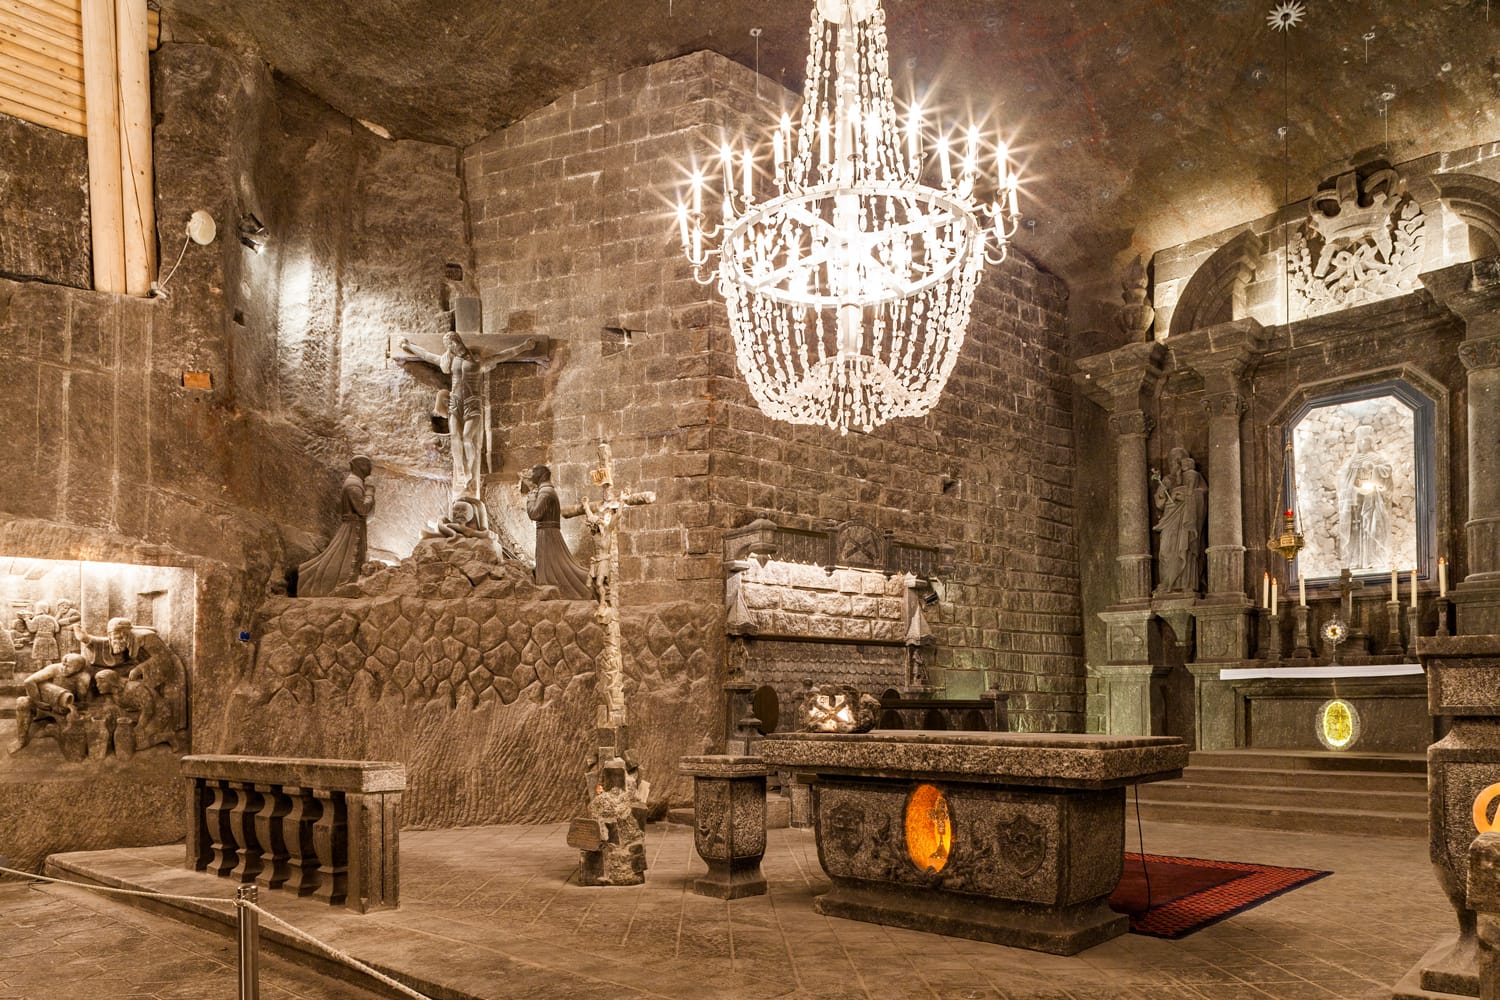 The Chapel of St. Kinga is the most famous chamber in underground Wieliczka salt museum